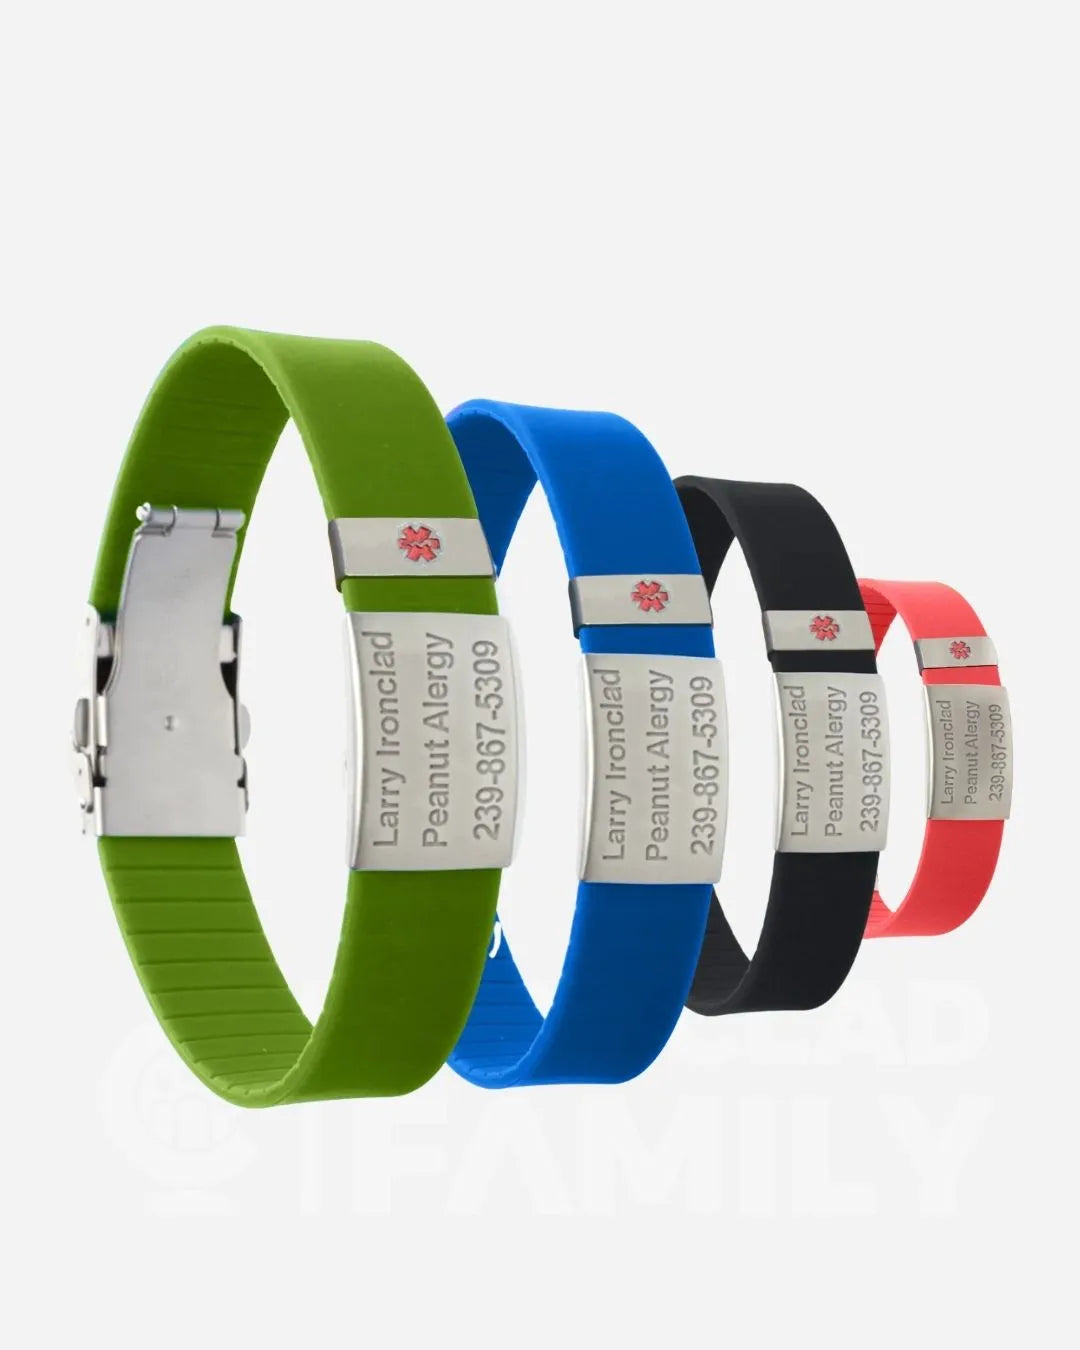 CUSTOM MEDICAL ID BRACELETS, Made... - The Living Collection | Facebook